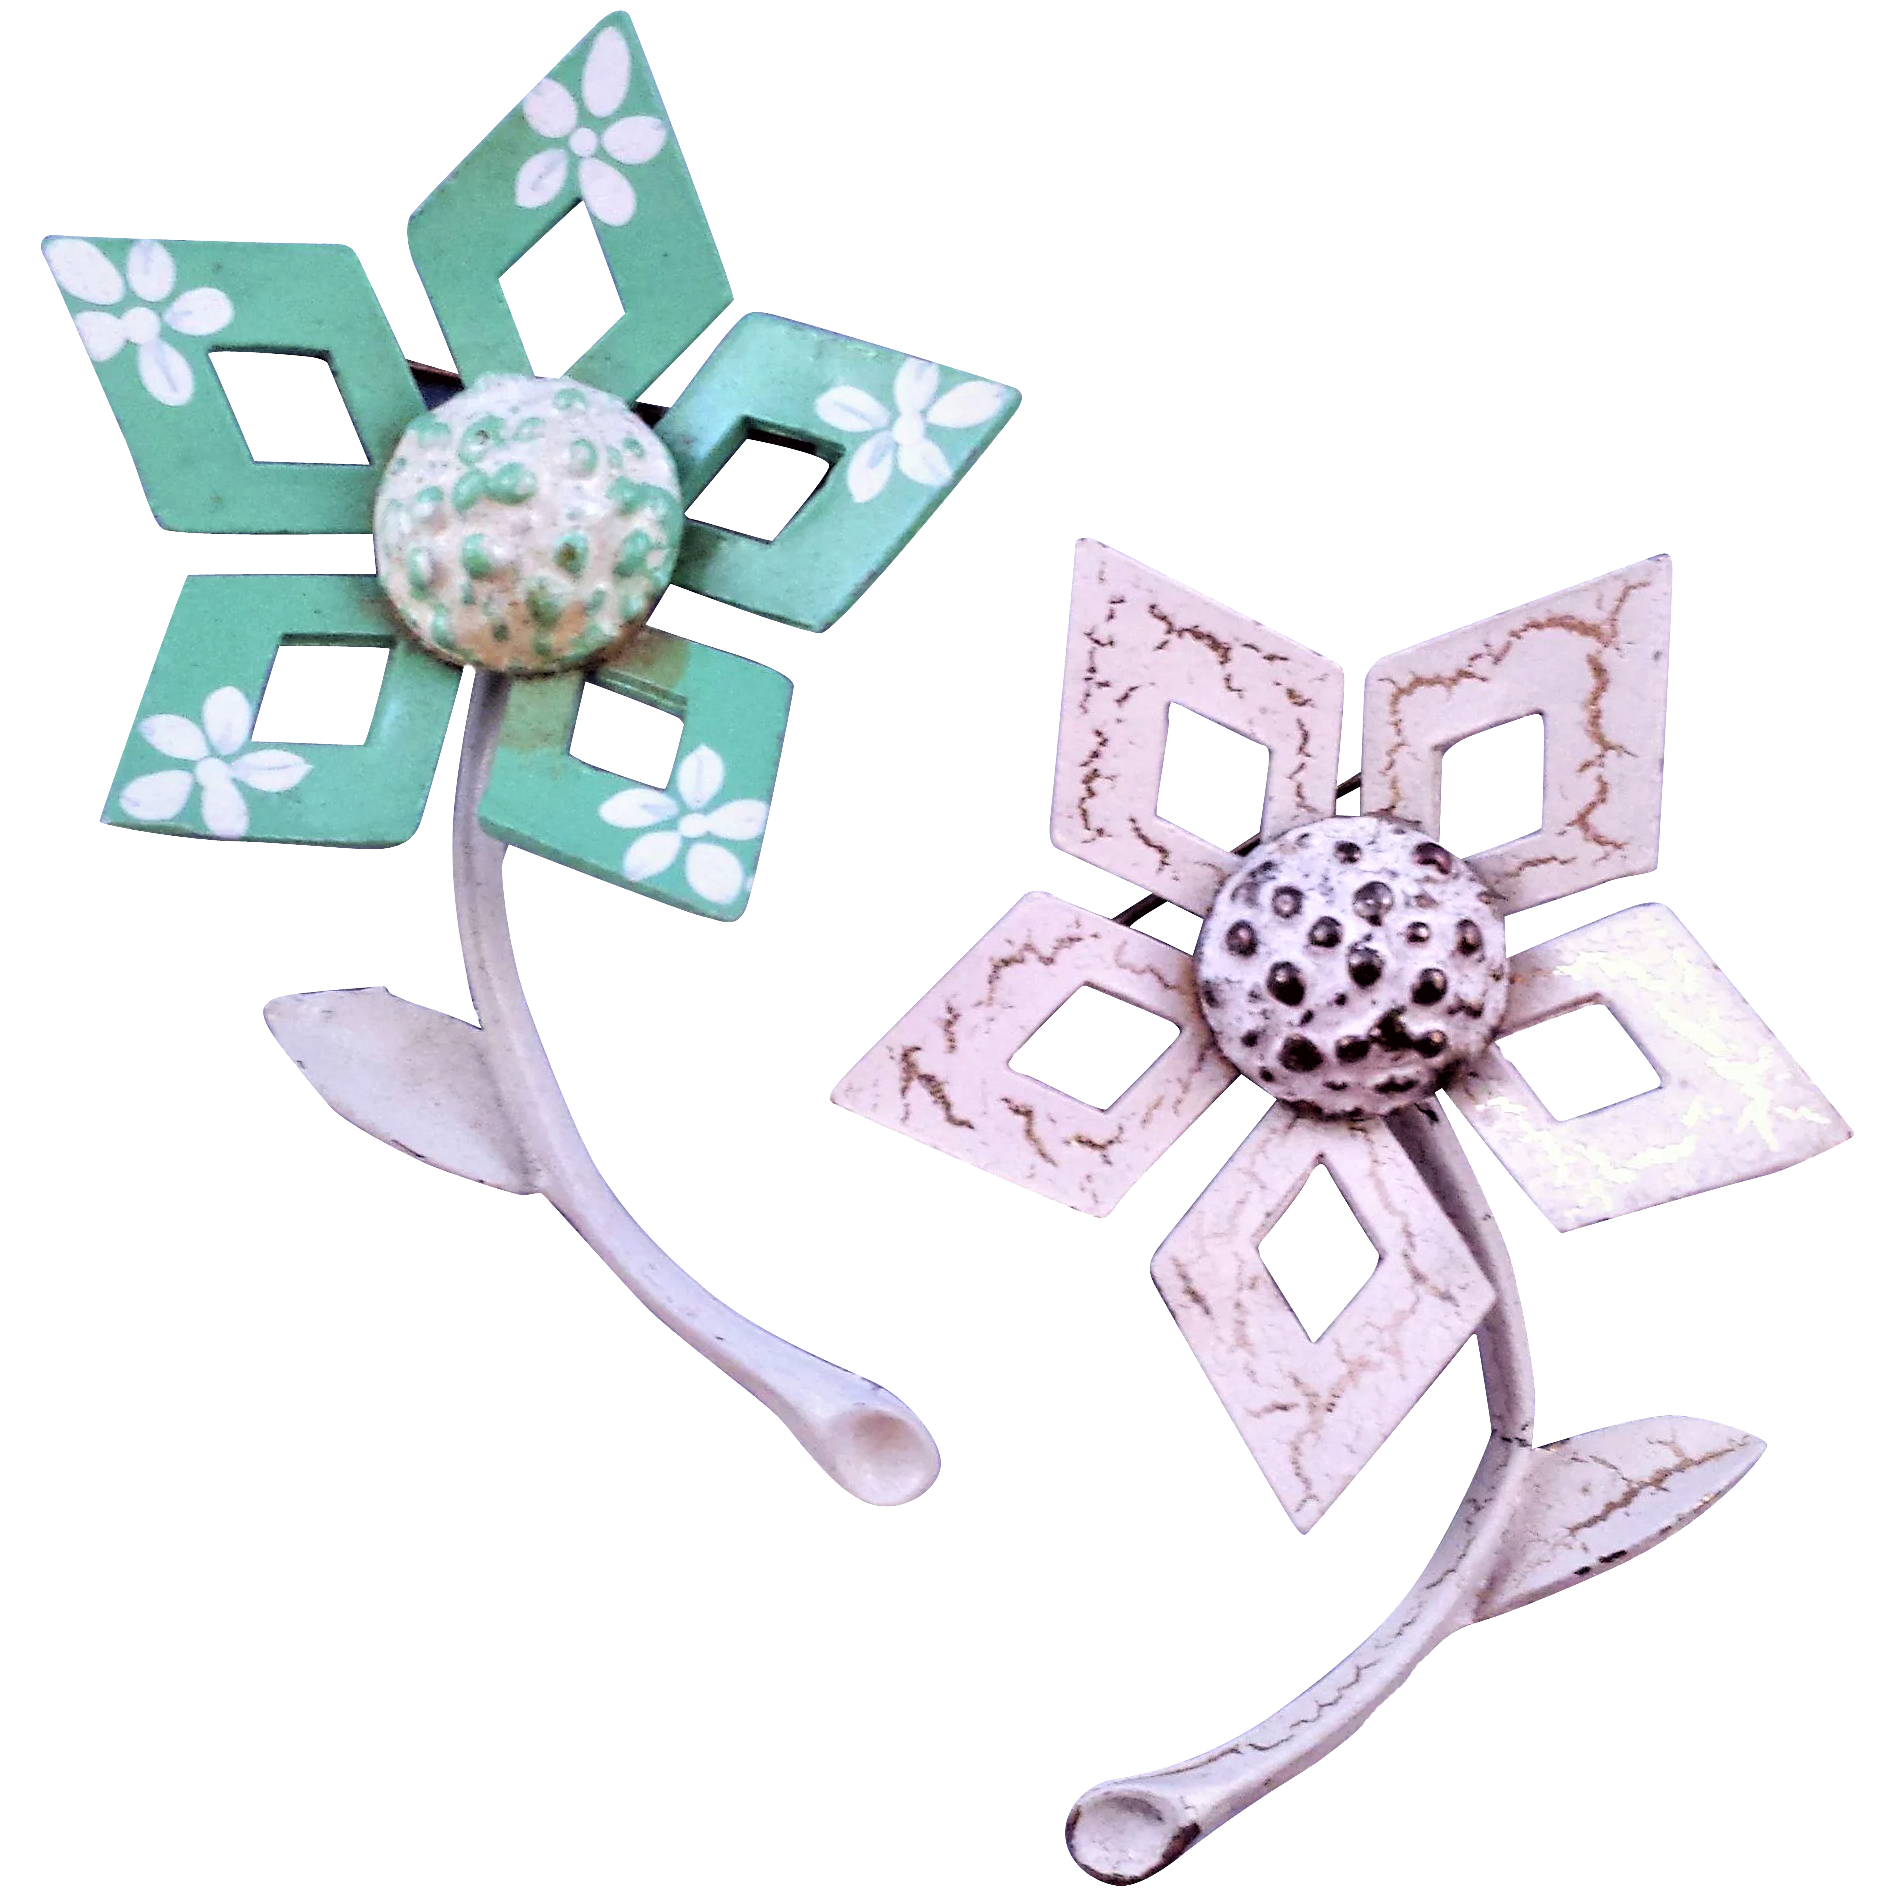 Duo of Geometric 1960s Flower Brooches in Sea Foam and White